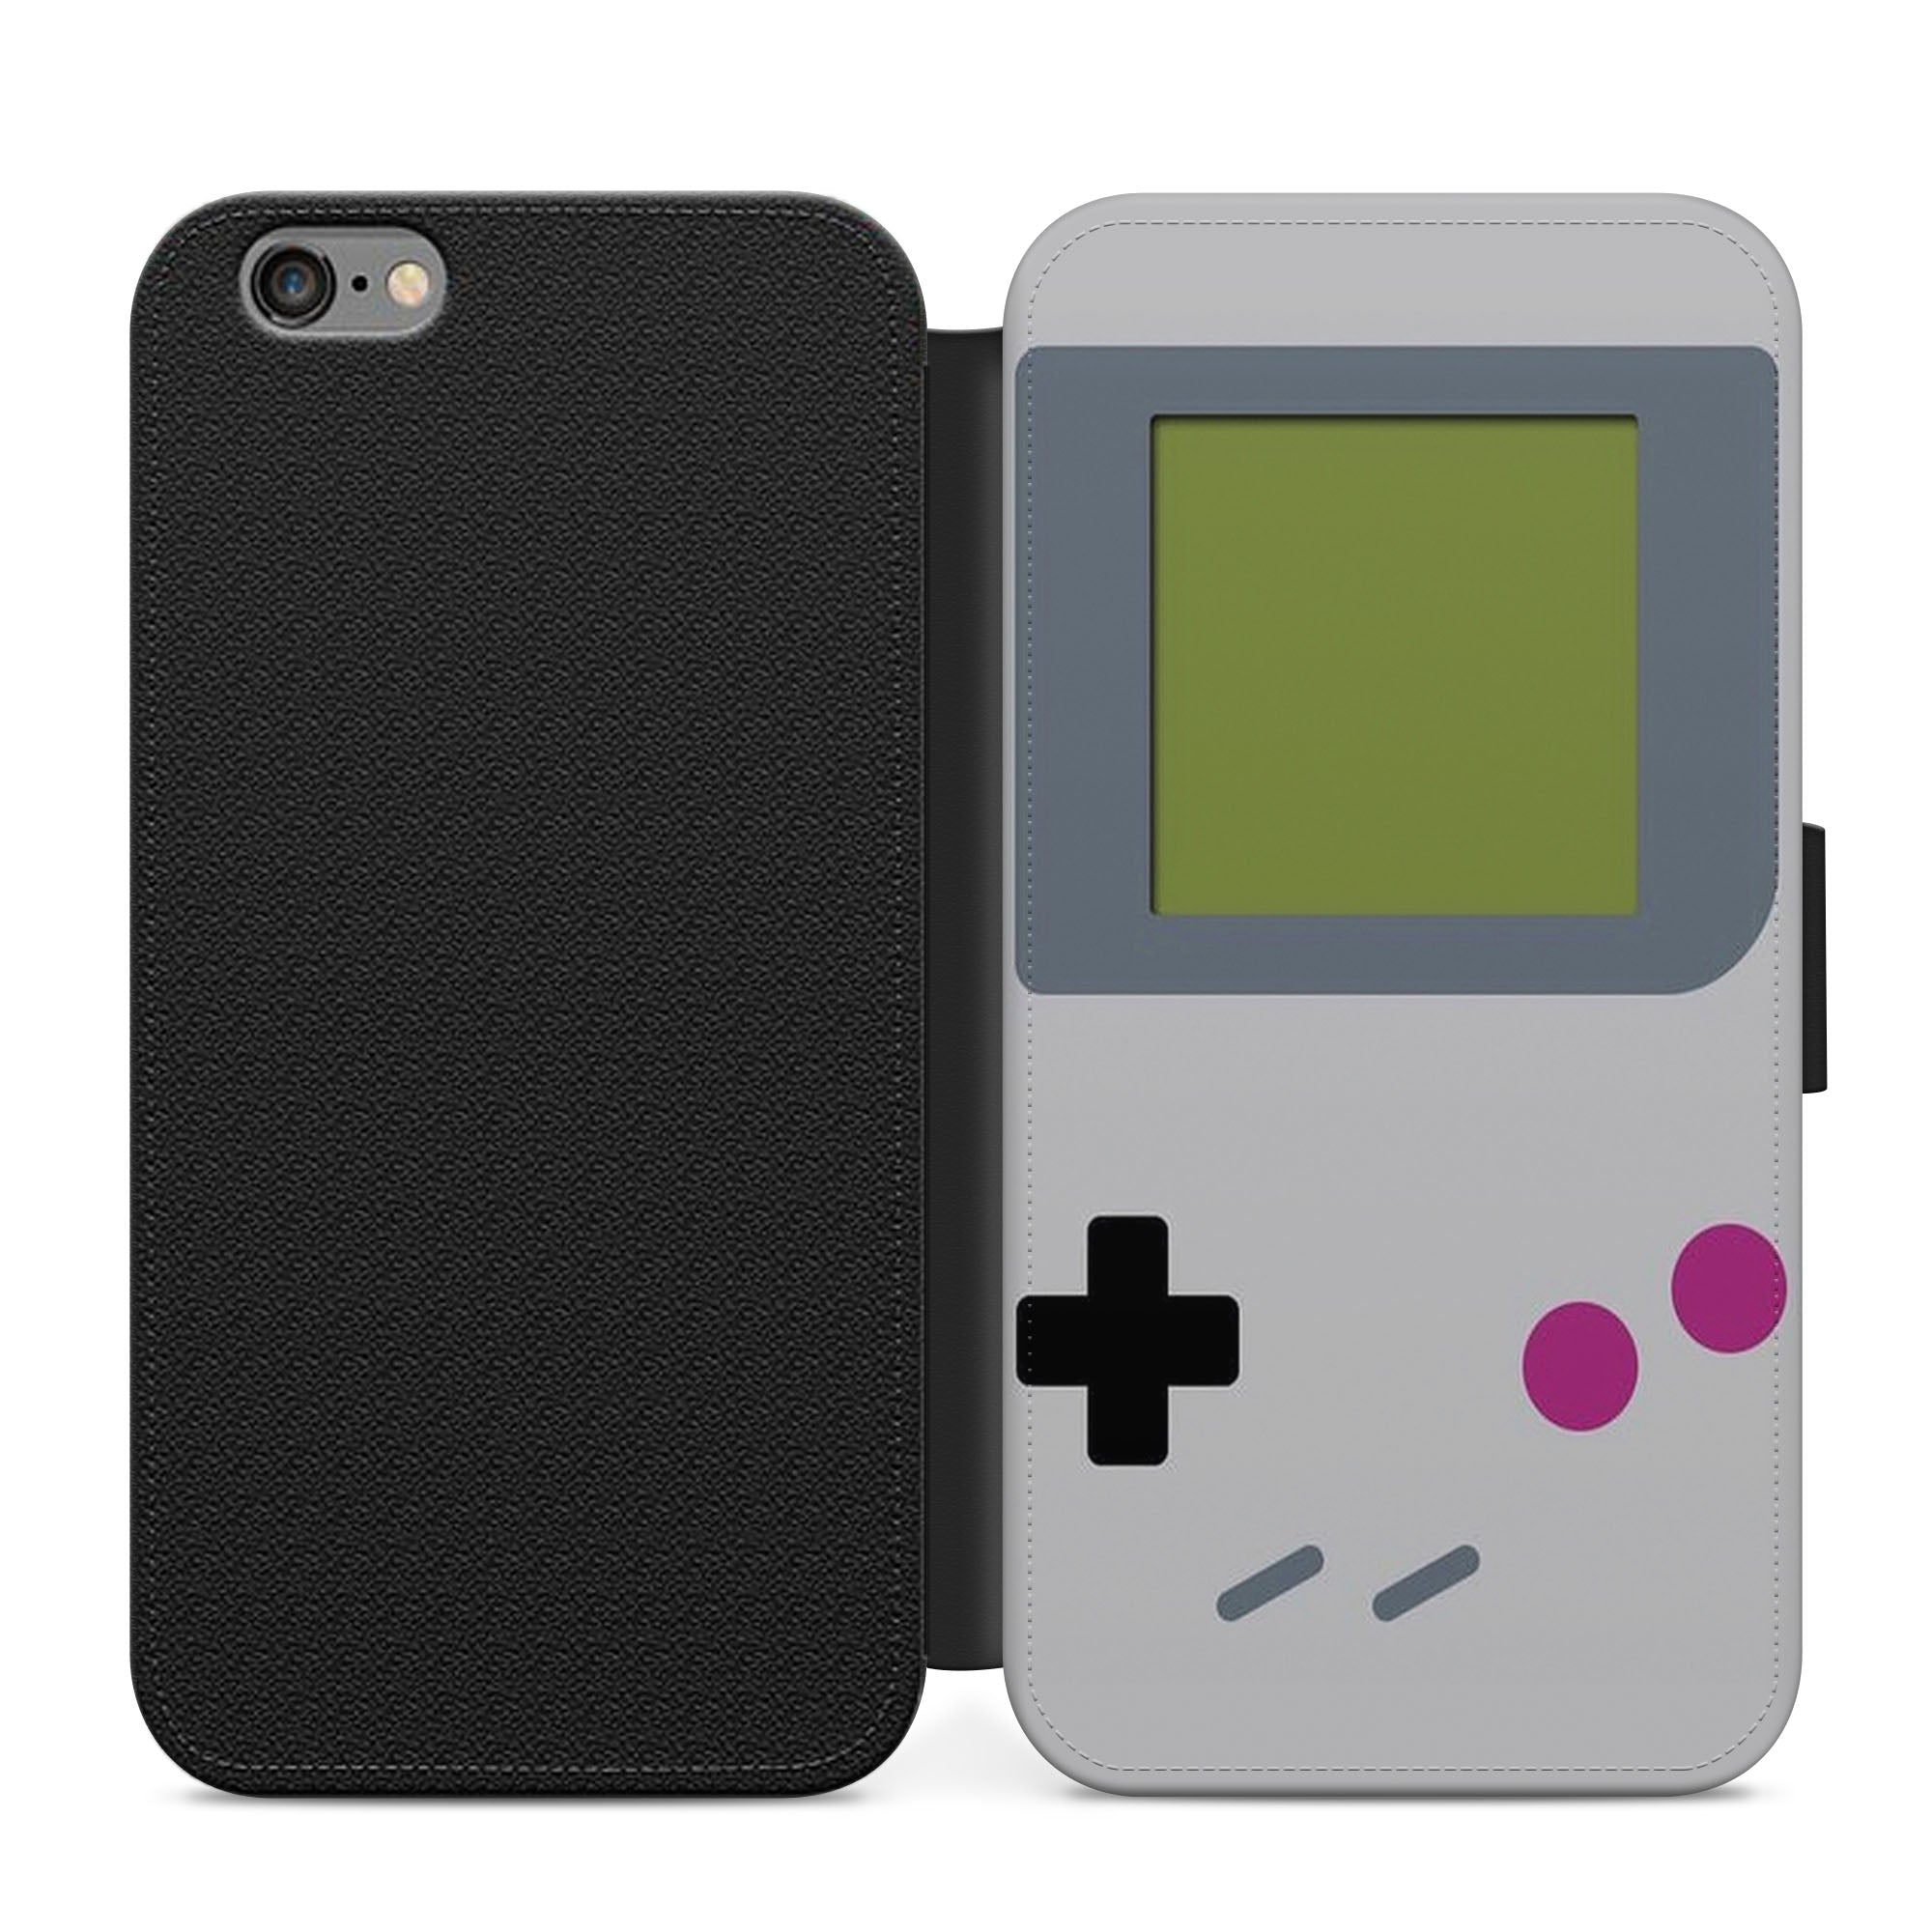 Retro Gameboy Grey Faux Leather Flip Case Wallet for iPhone / Samsung